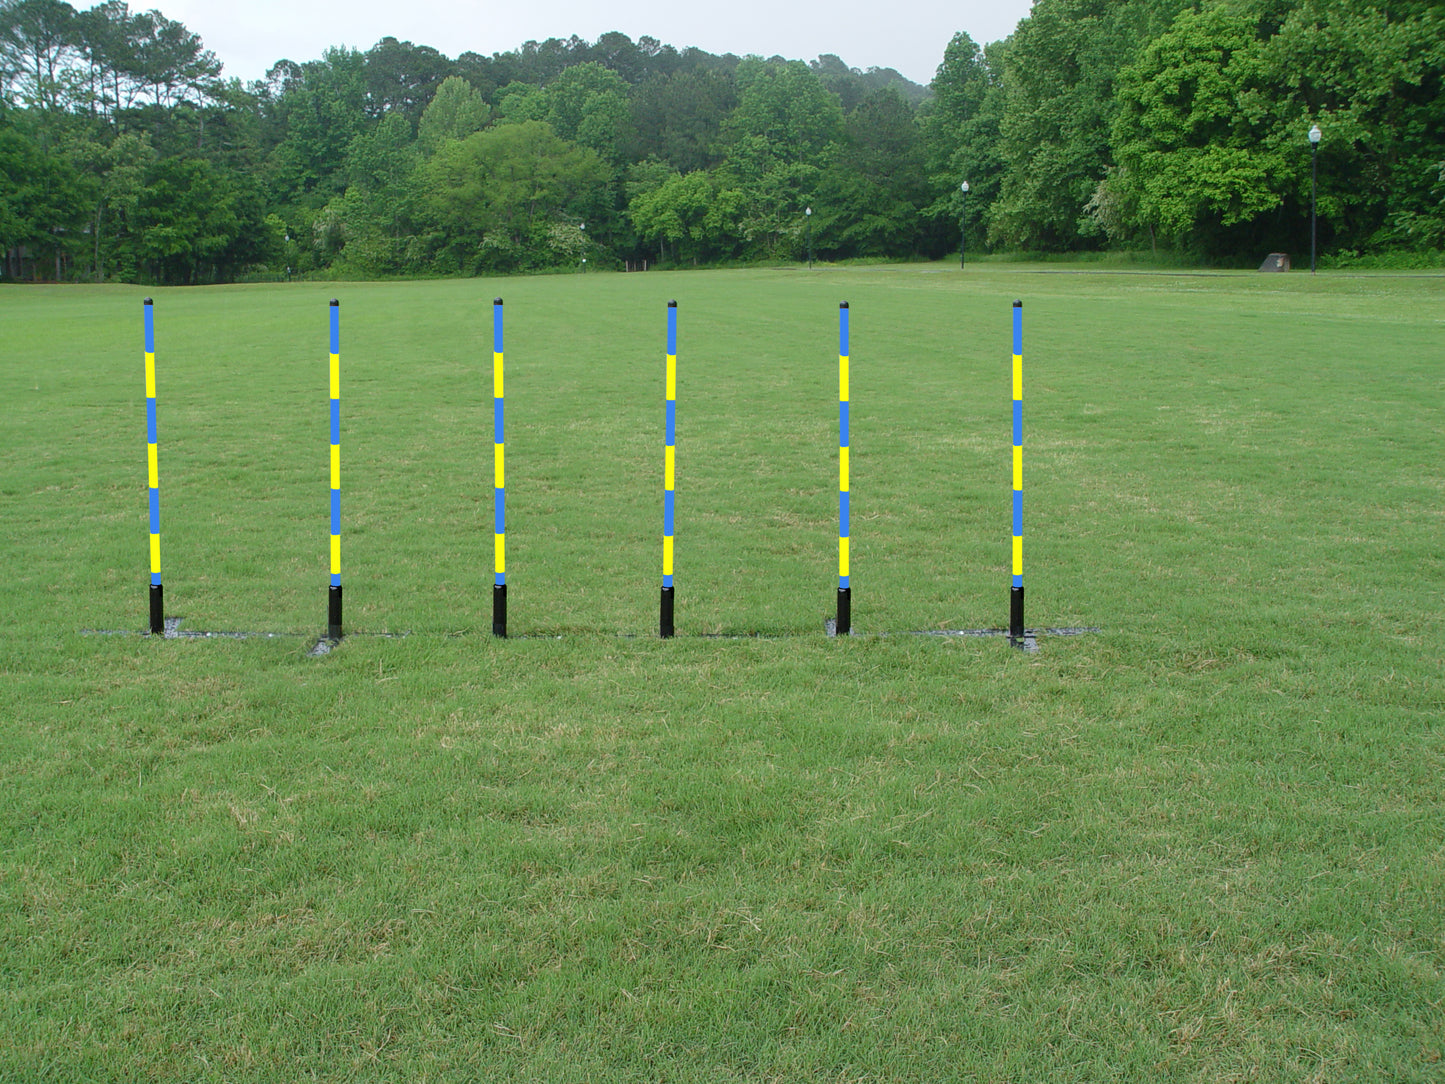 6 Pole Weave Poles with Adjustable Pole Spacing From 19" to 25" - Dog Agility USA